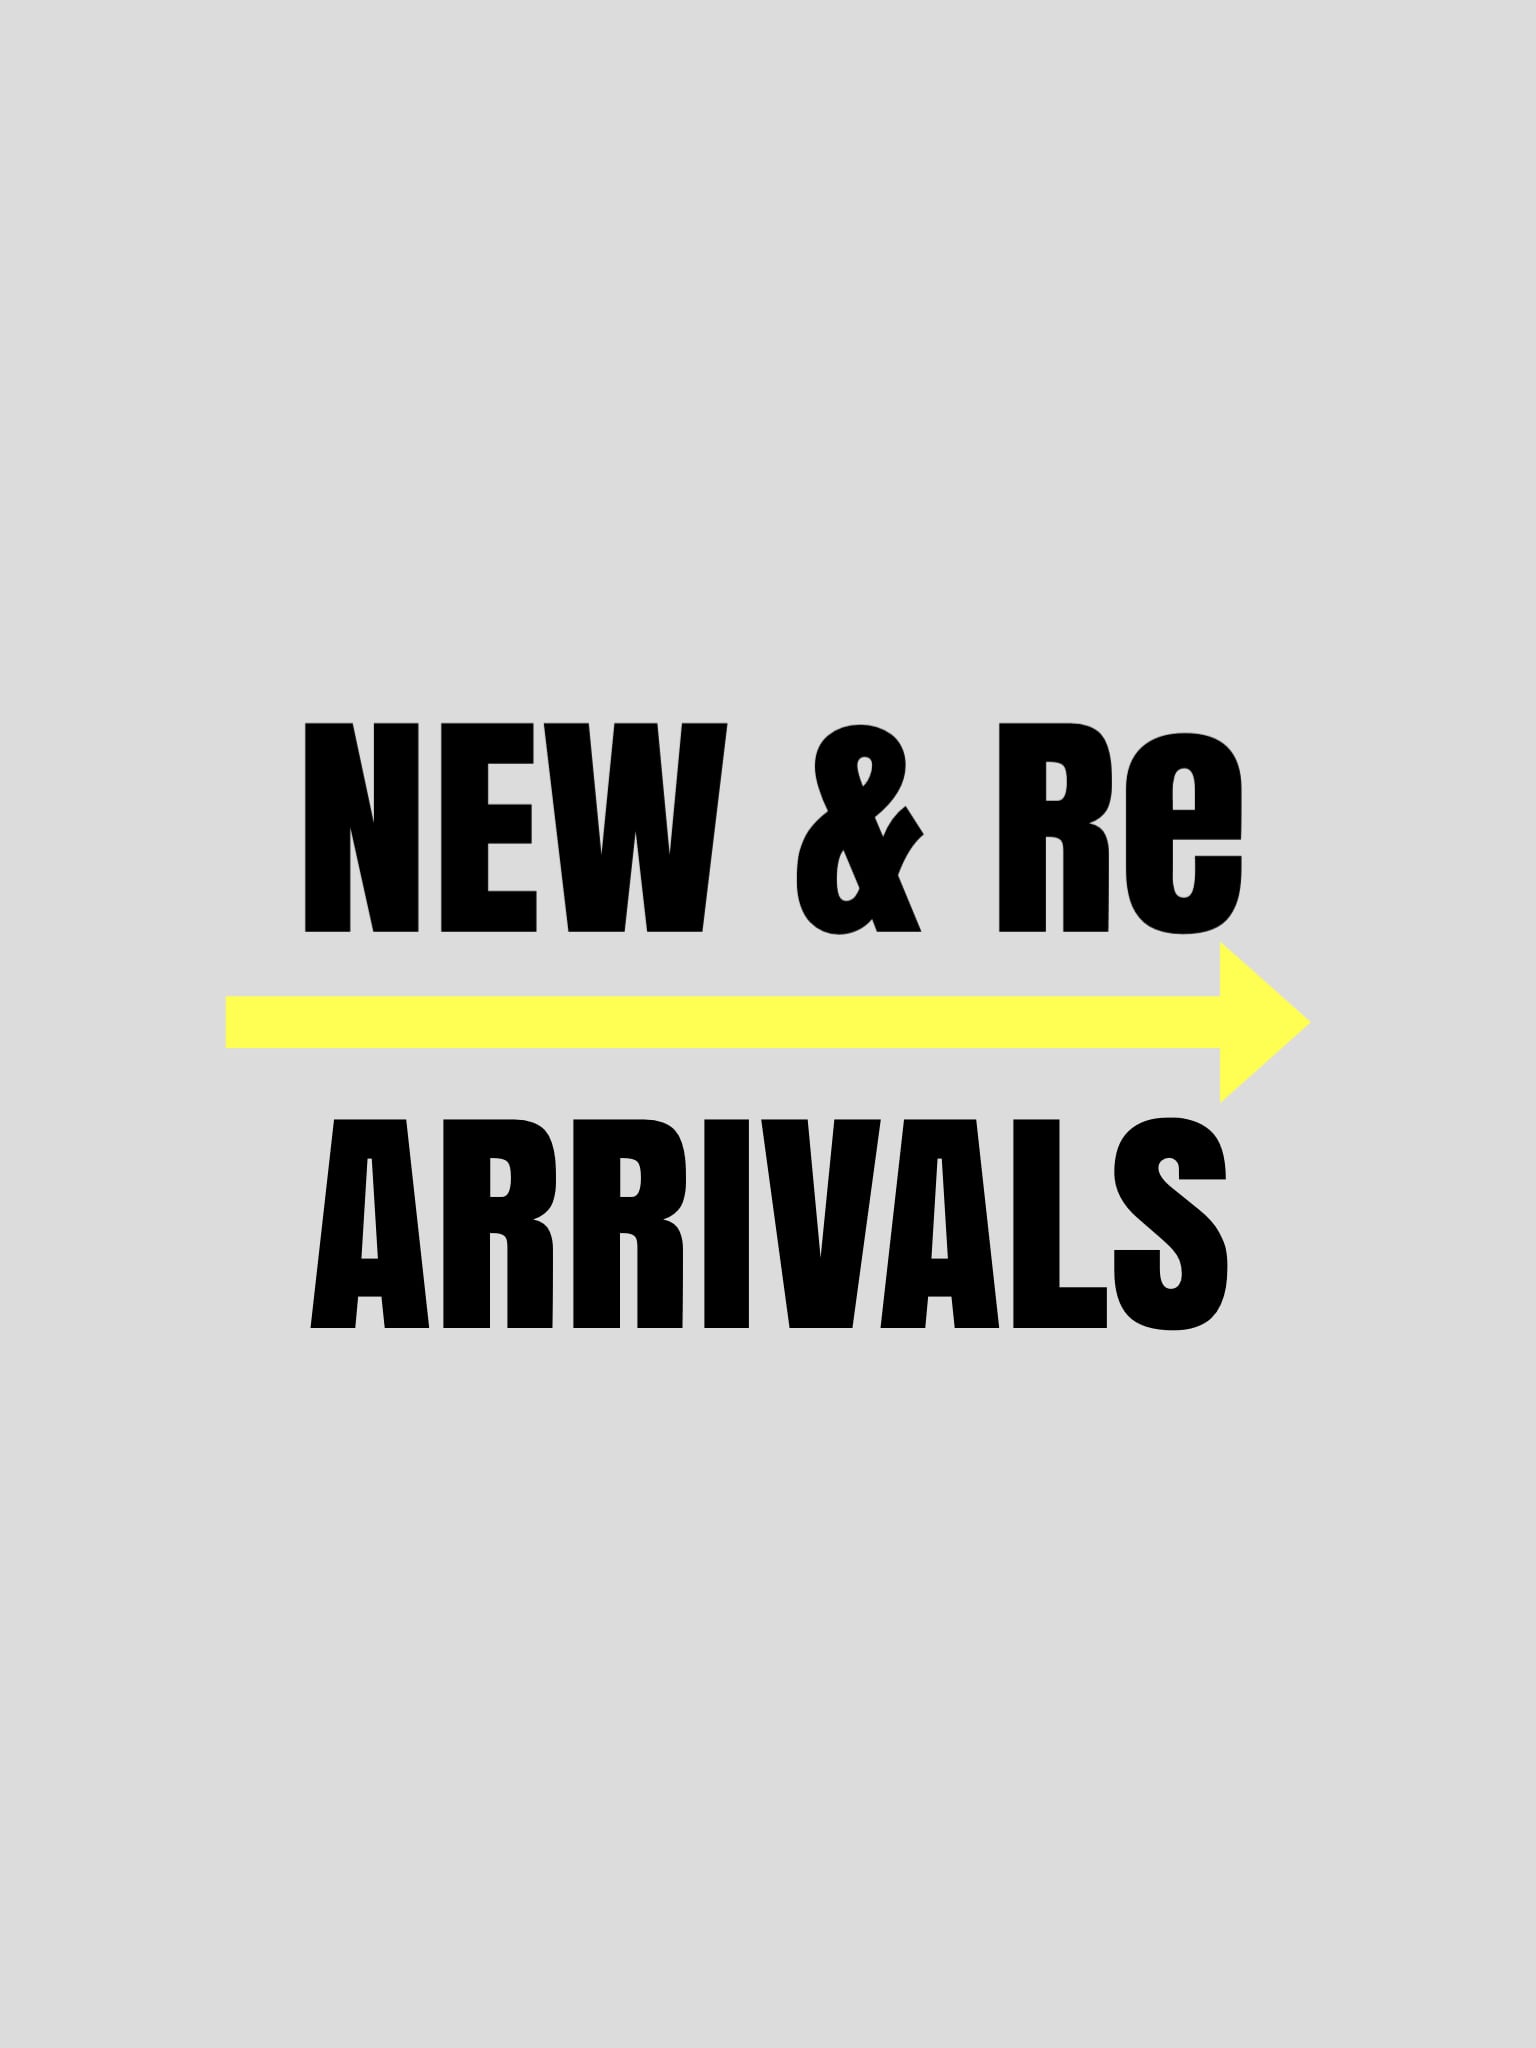 NEW&RE ARRIVALS